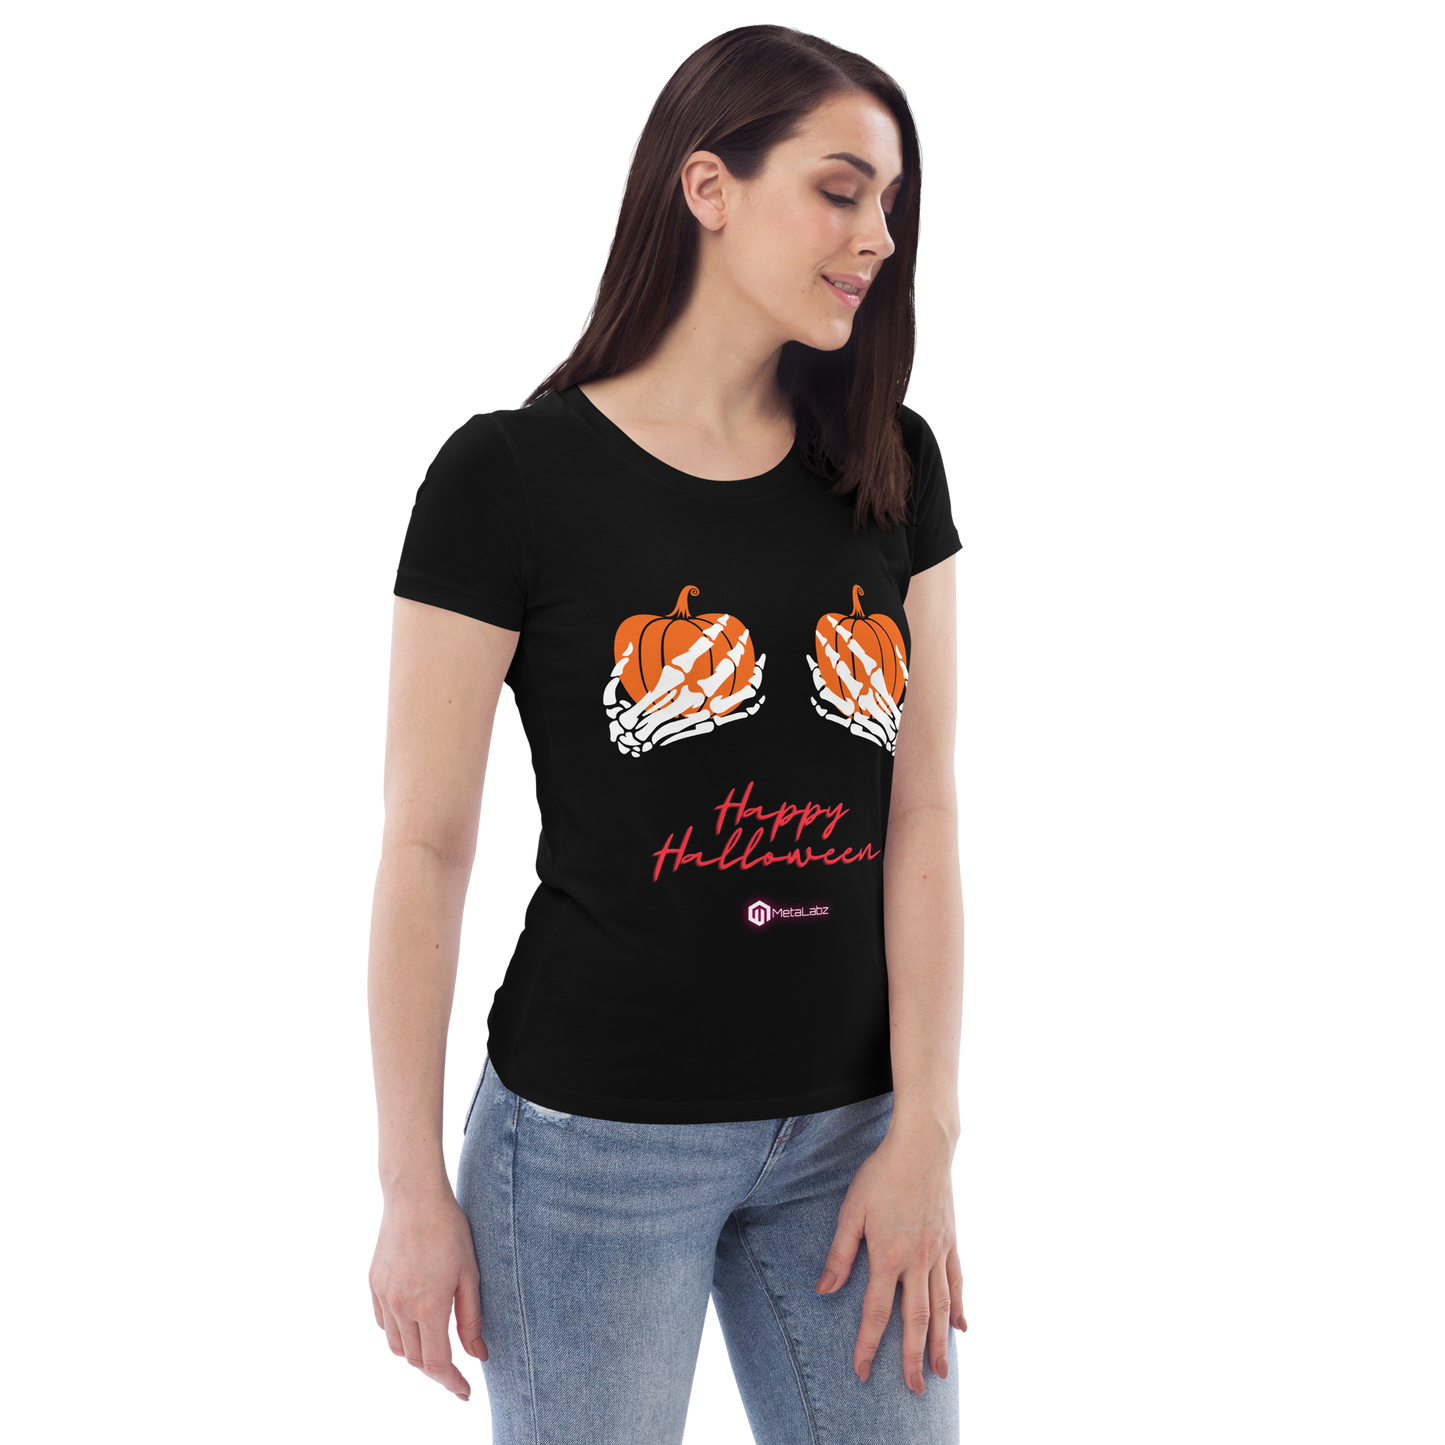 Women's fitted eco tee Halloween edition